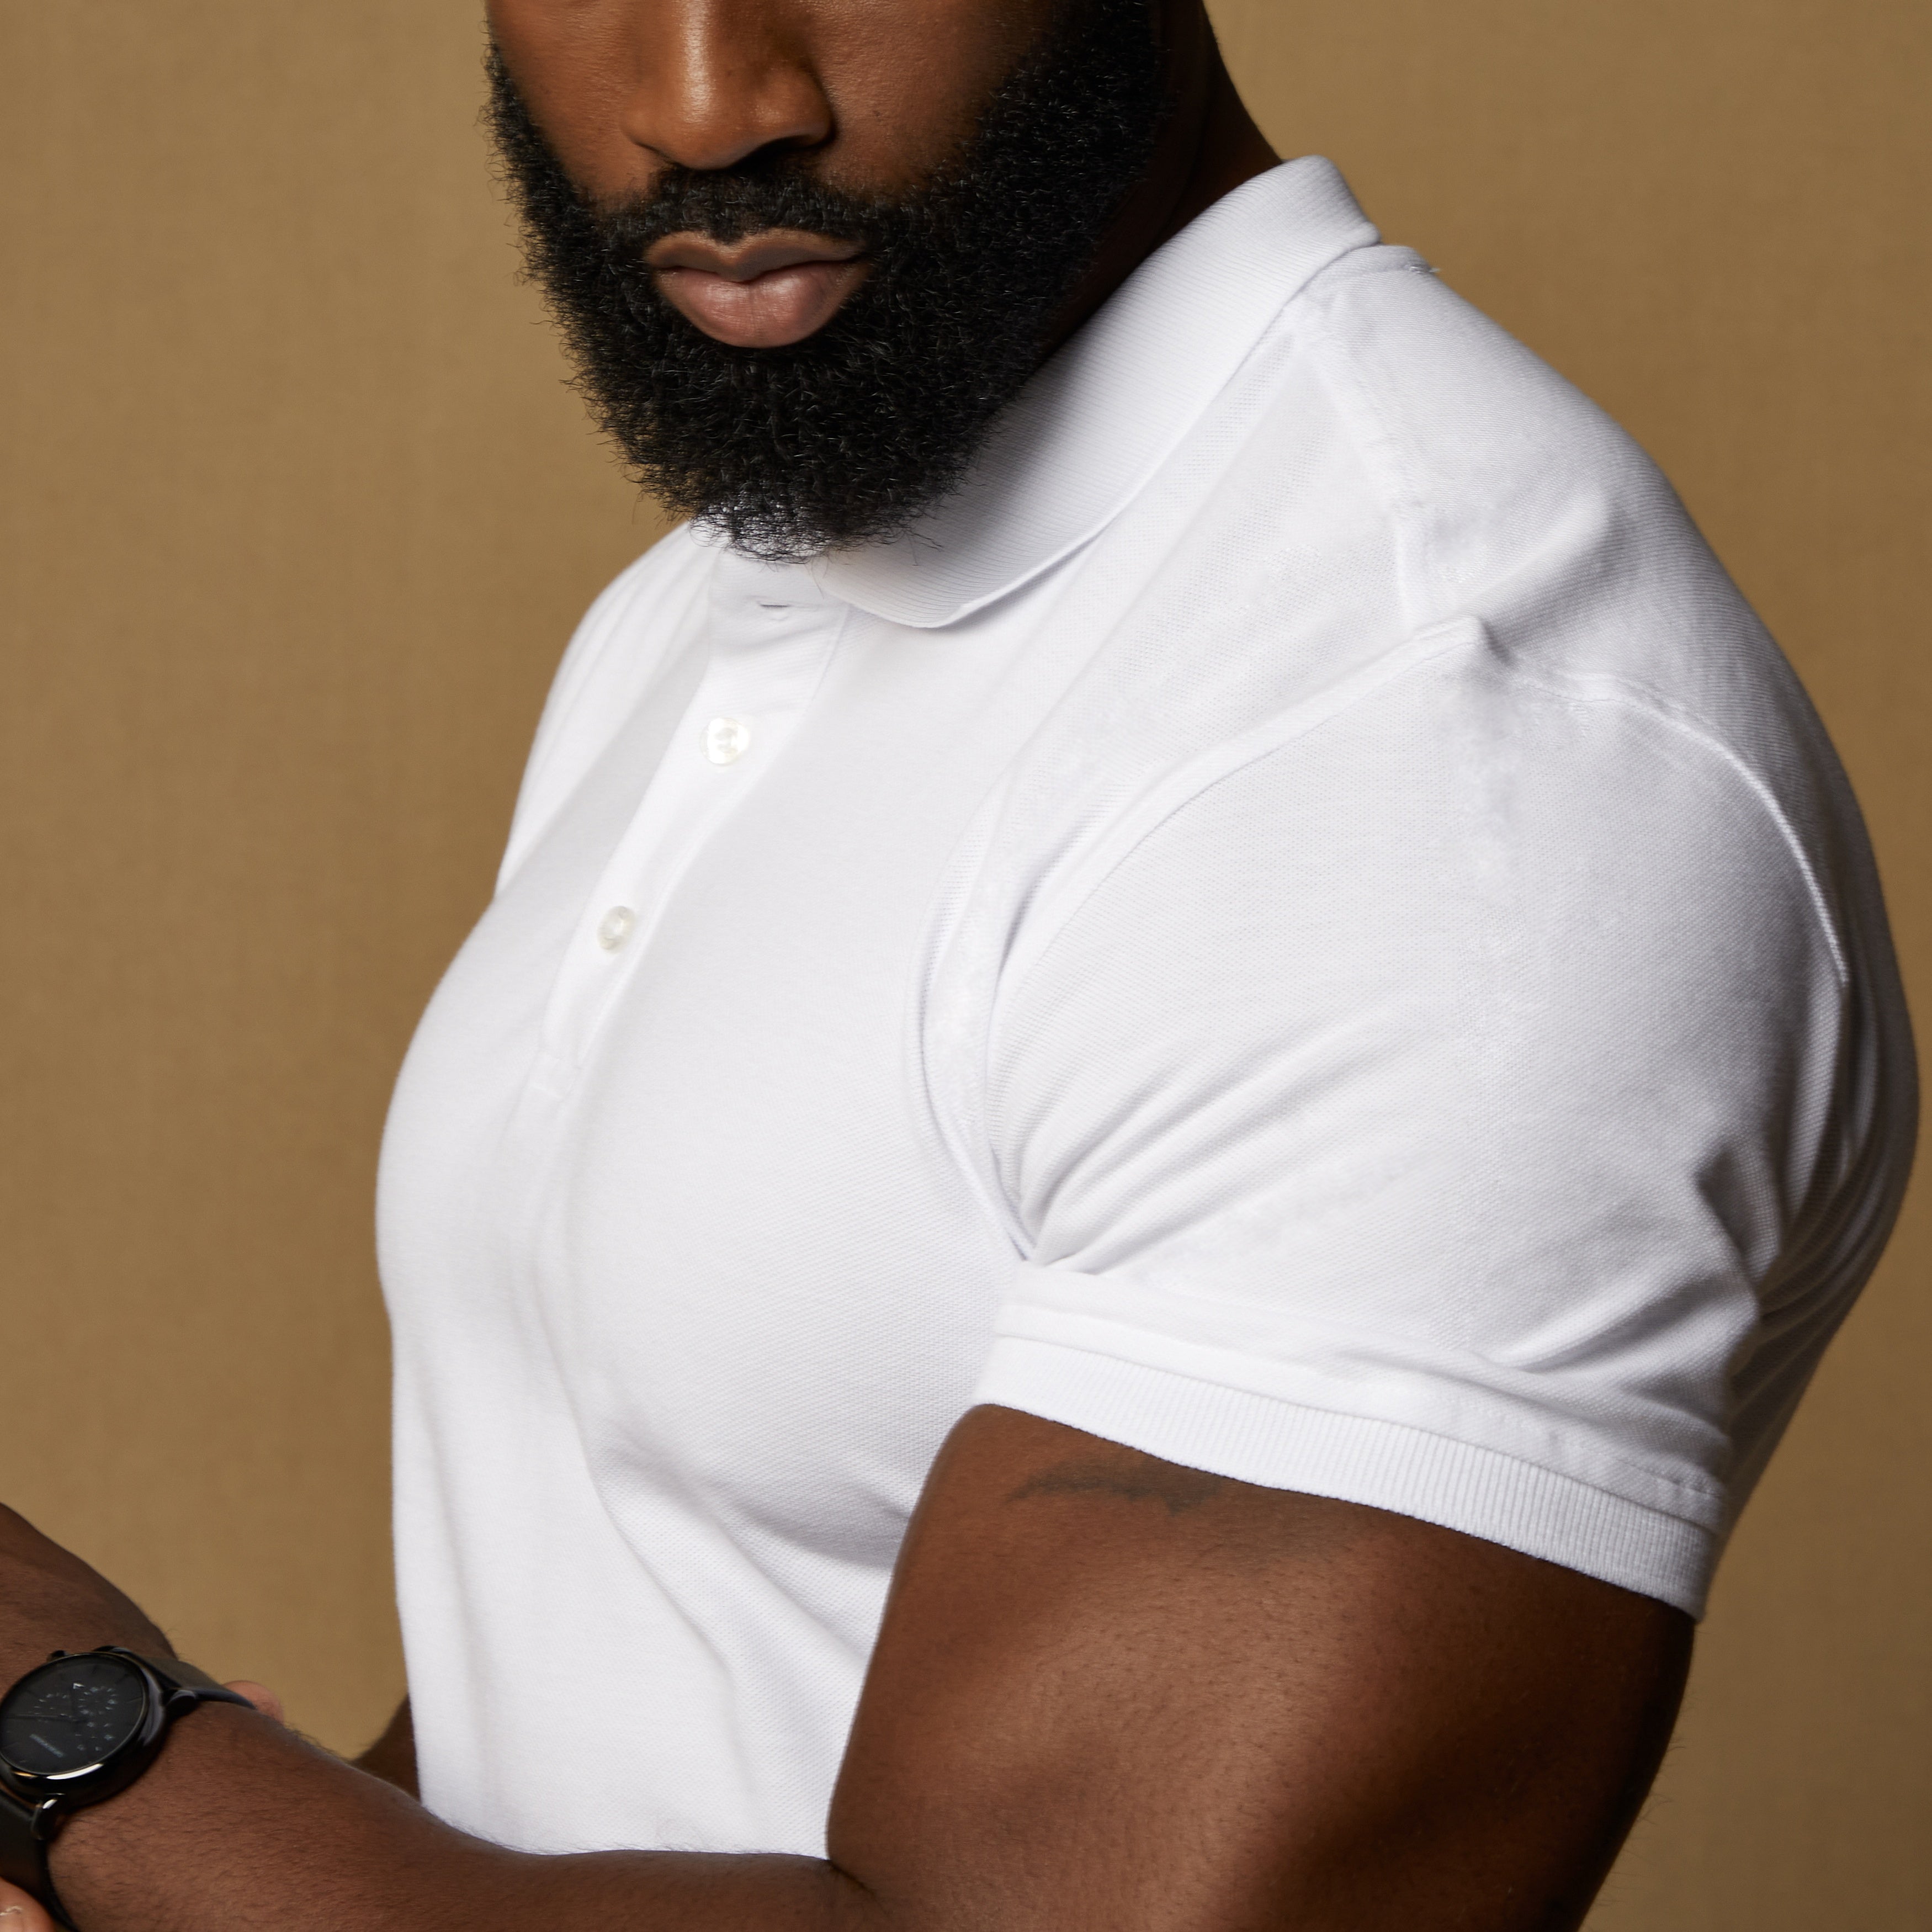 white polo shirts that fit around the bicep